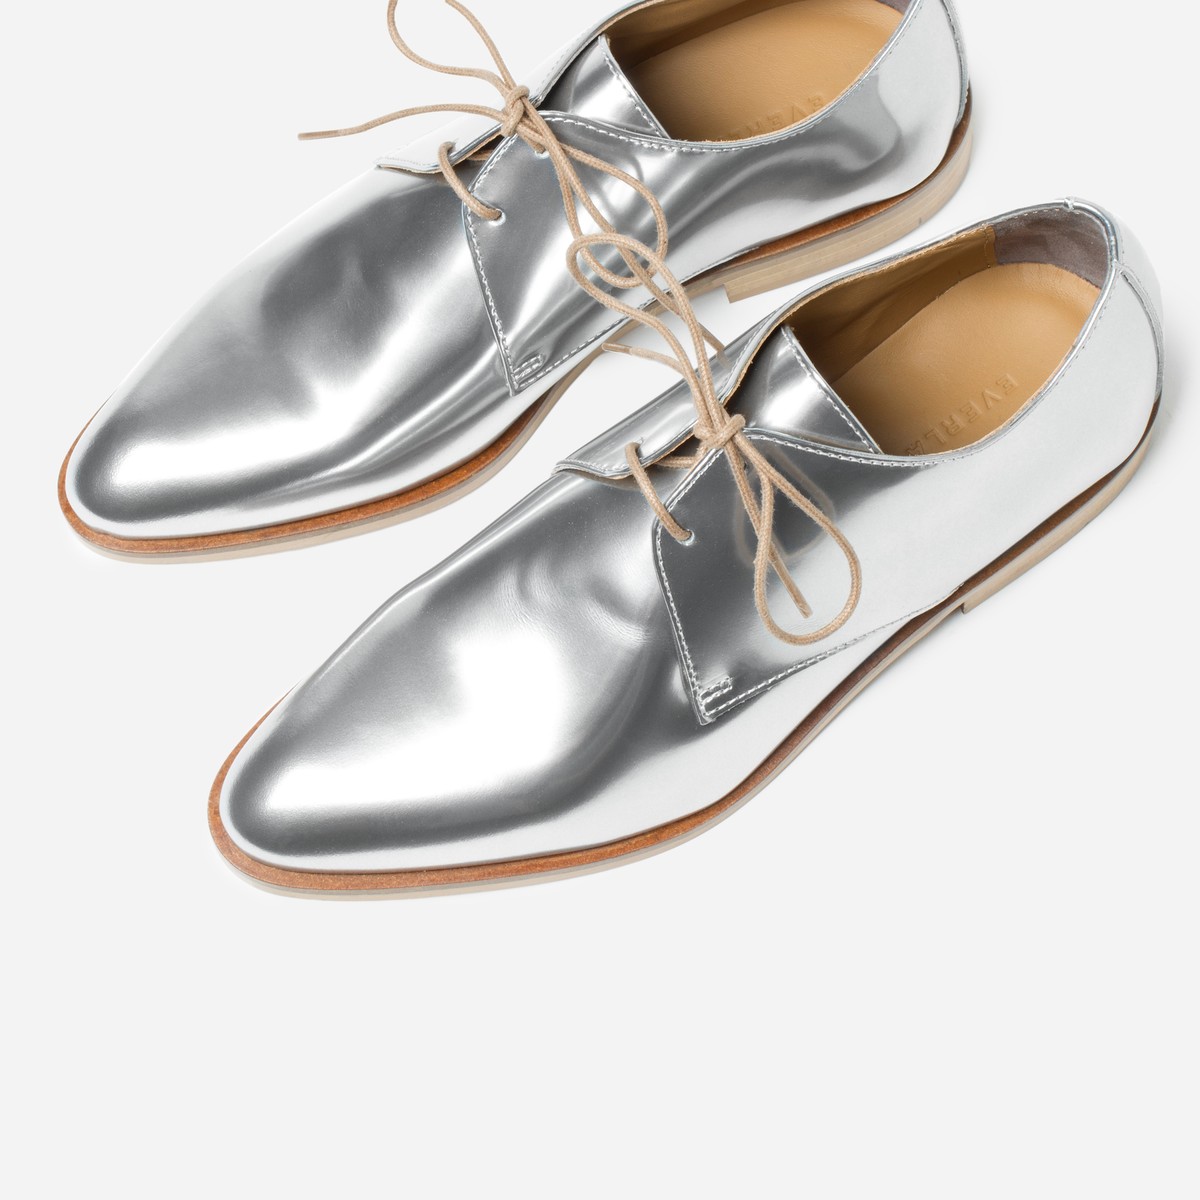 Our New Obsession: Everlane’s E2 Shine Modern Oxford